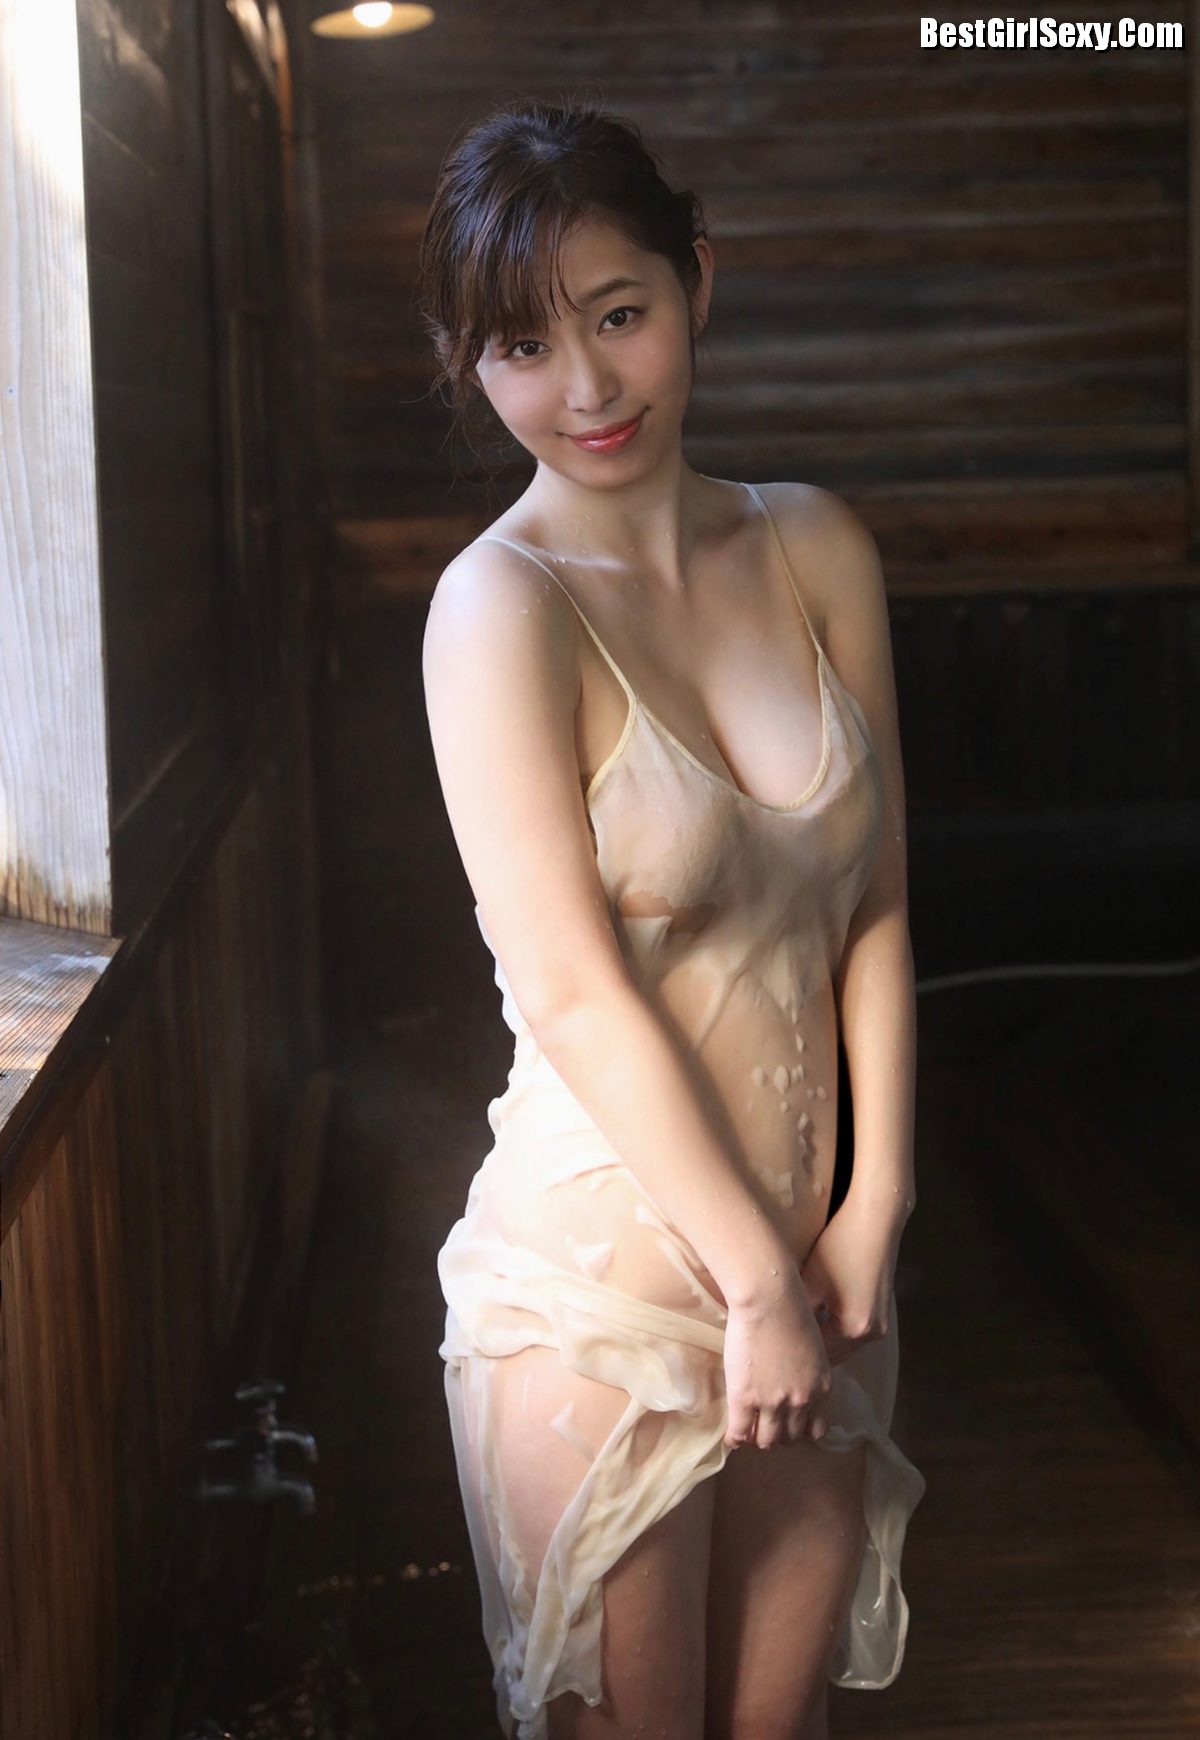 FRIDAY Misumi Shiochi 塩地美澄 One Night And Two Days A Special Journey Vol 3 0057 0252236843.jpg